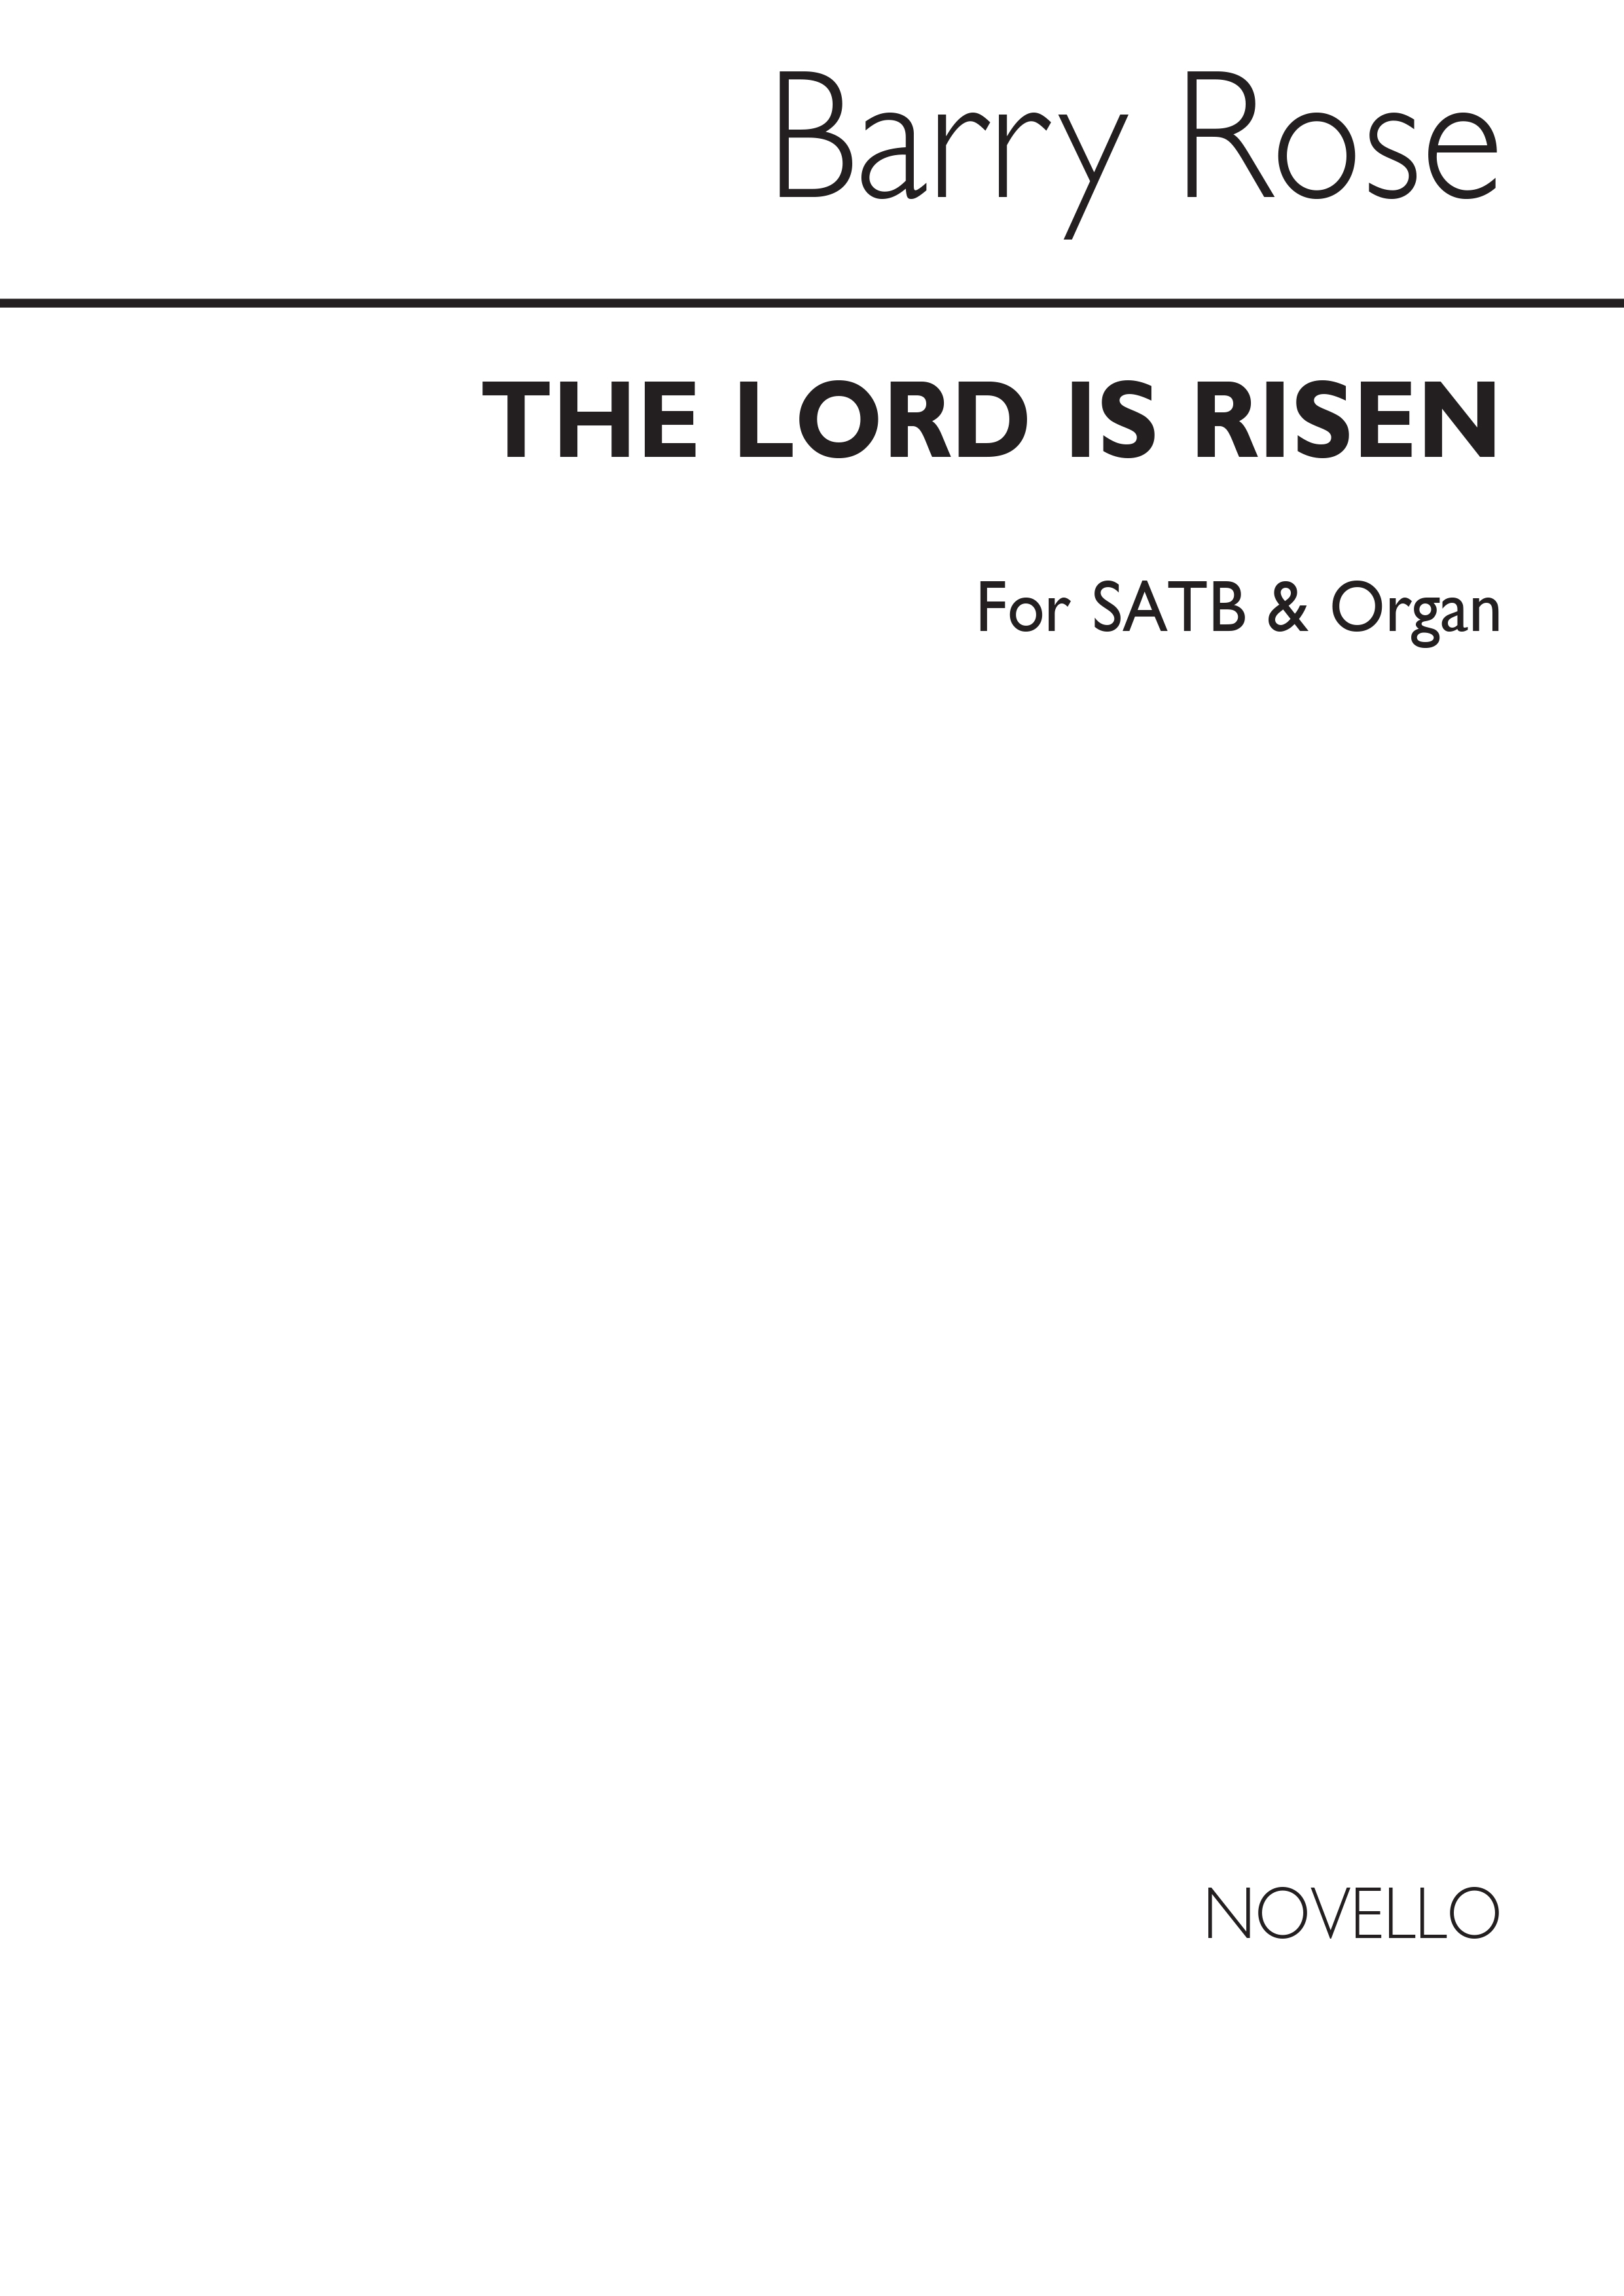 Barry Rose: The Lord Is Risen